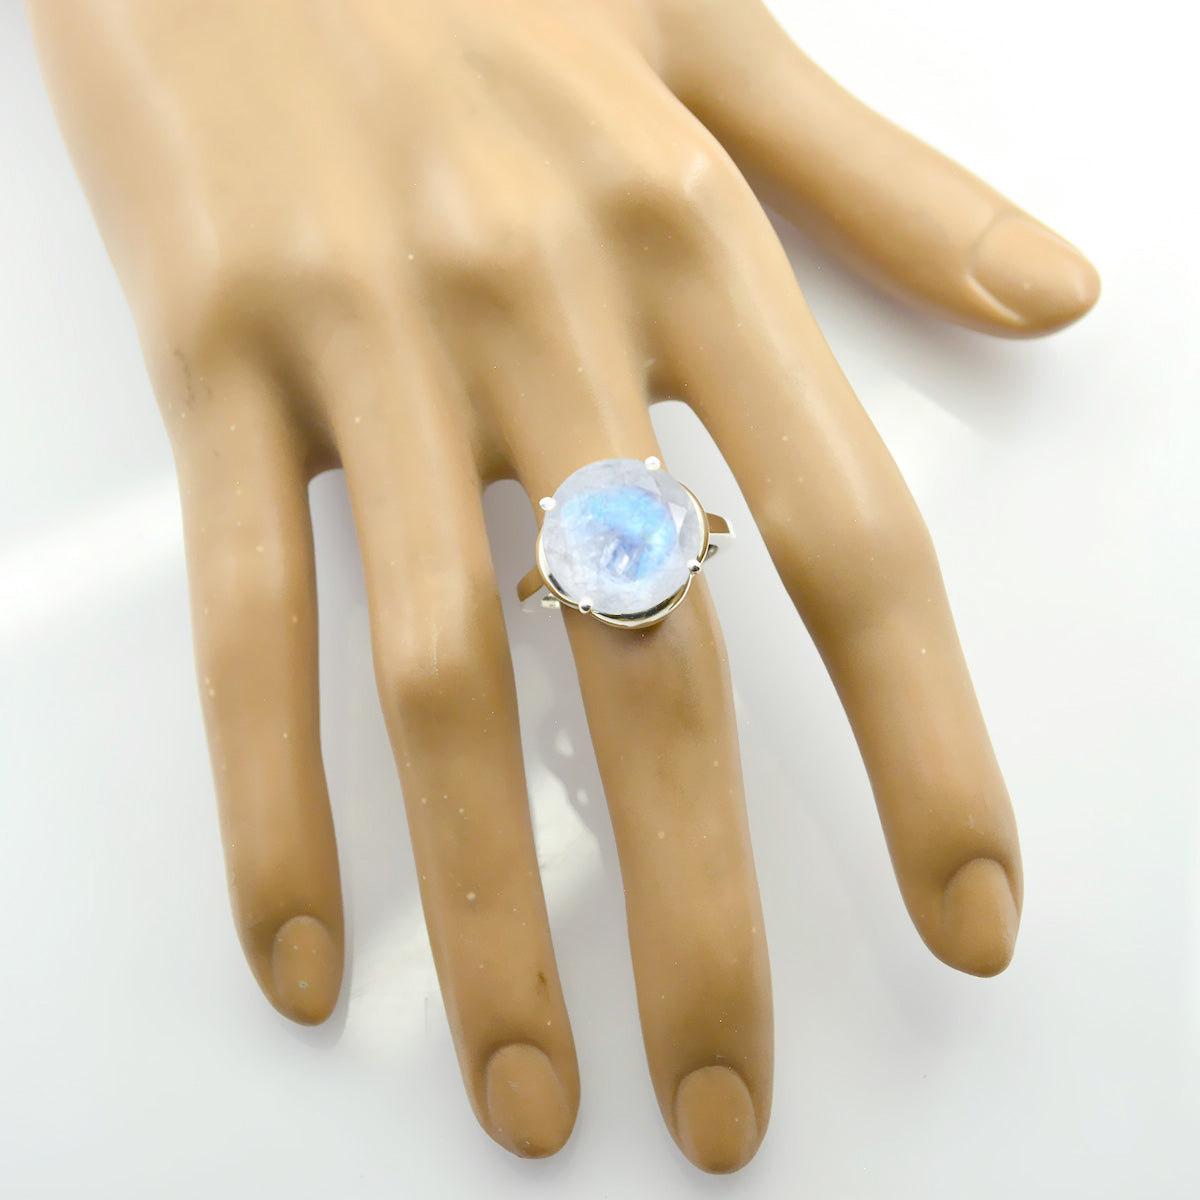 Comely Gem Rainbow Moonstone Solid Silver Ring Great Selling Item